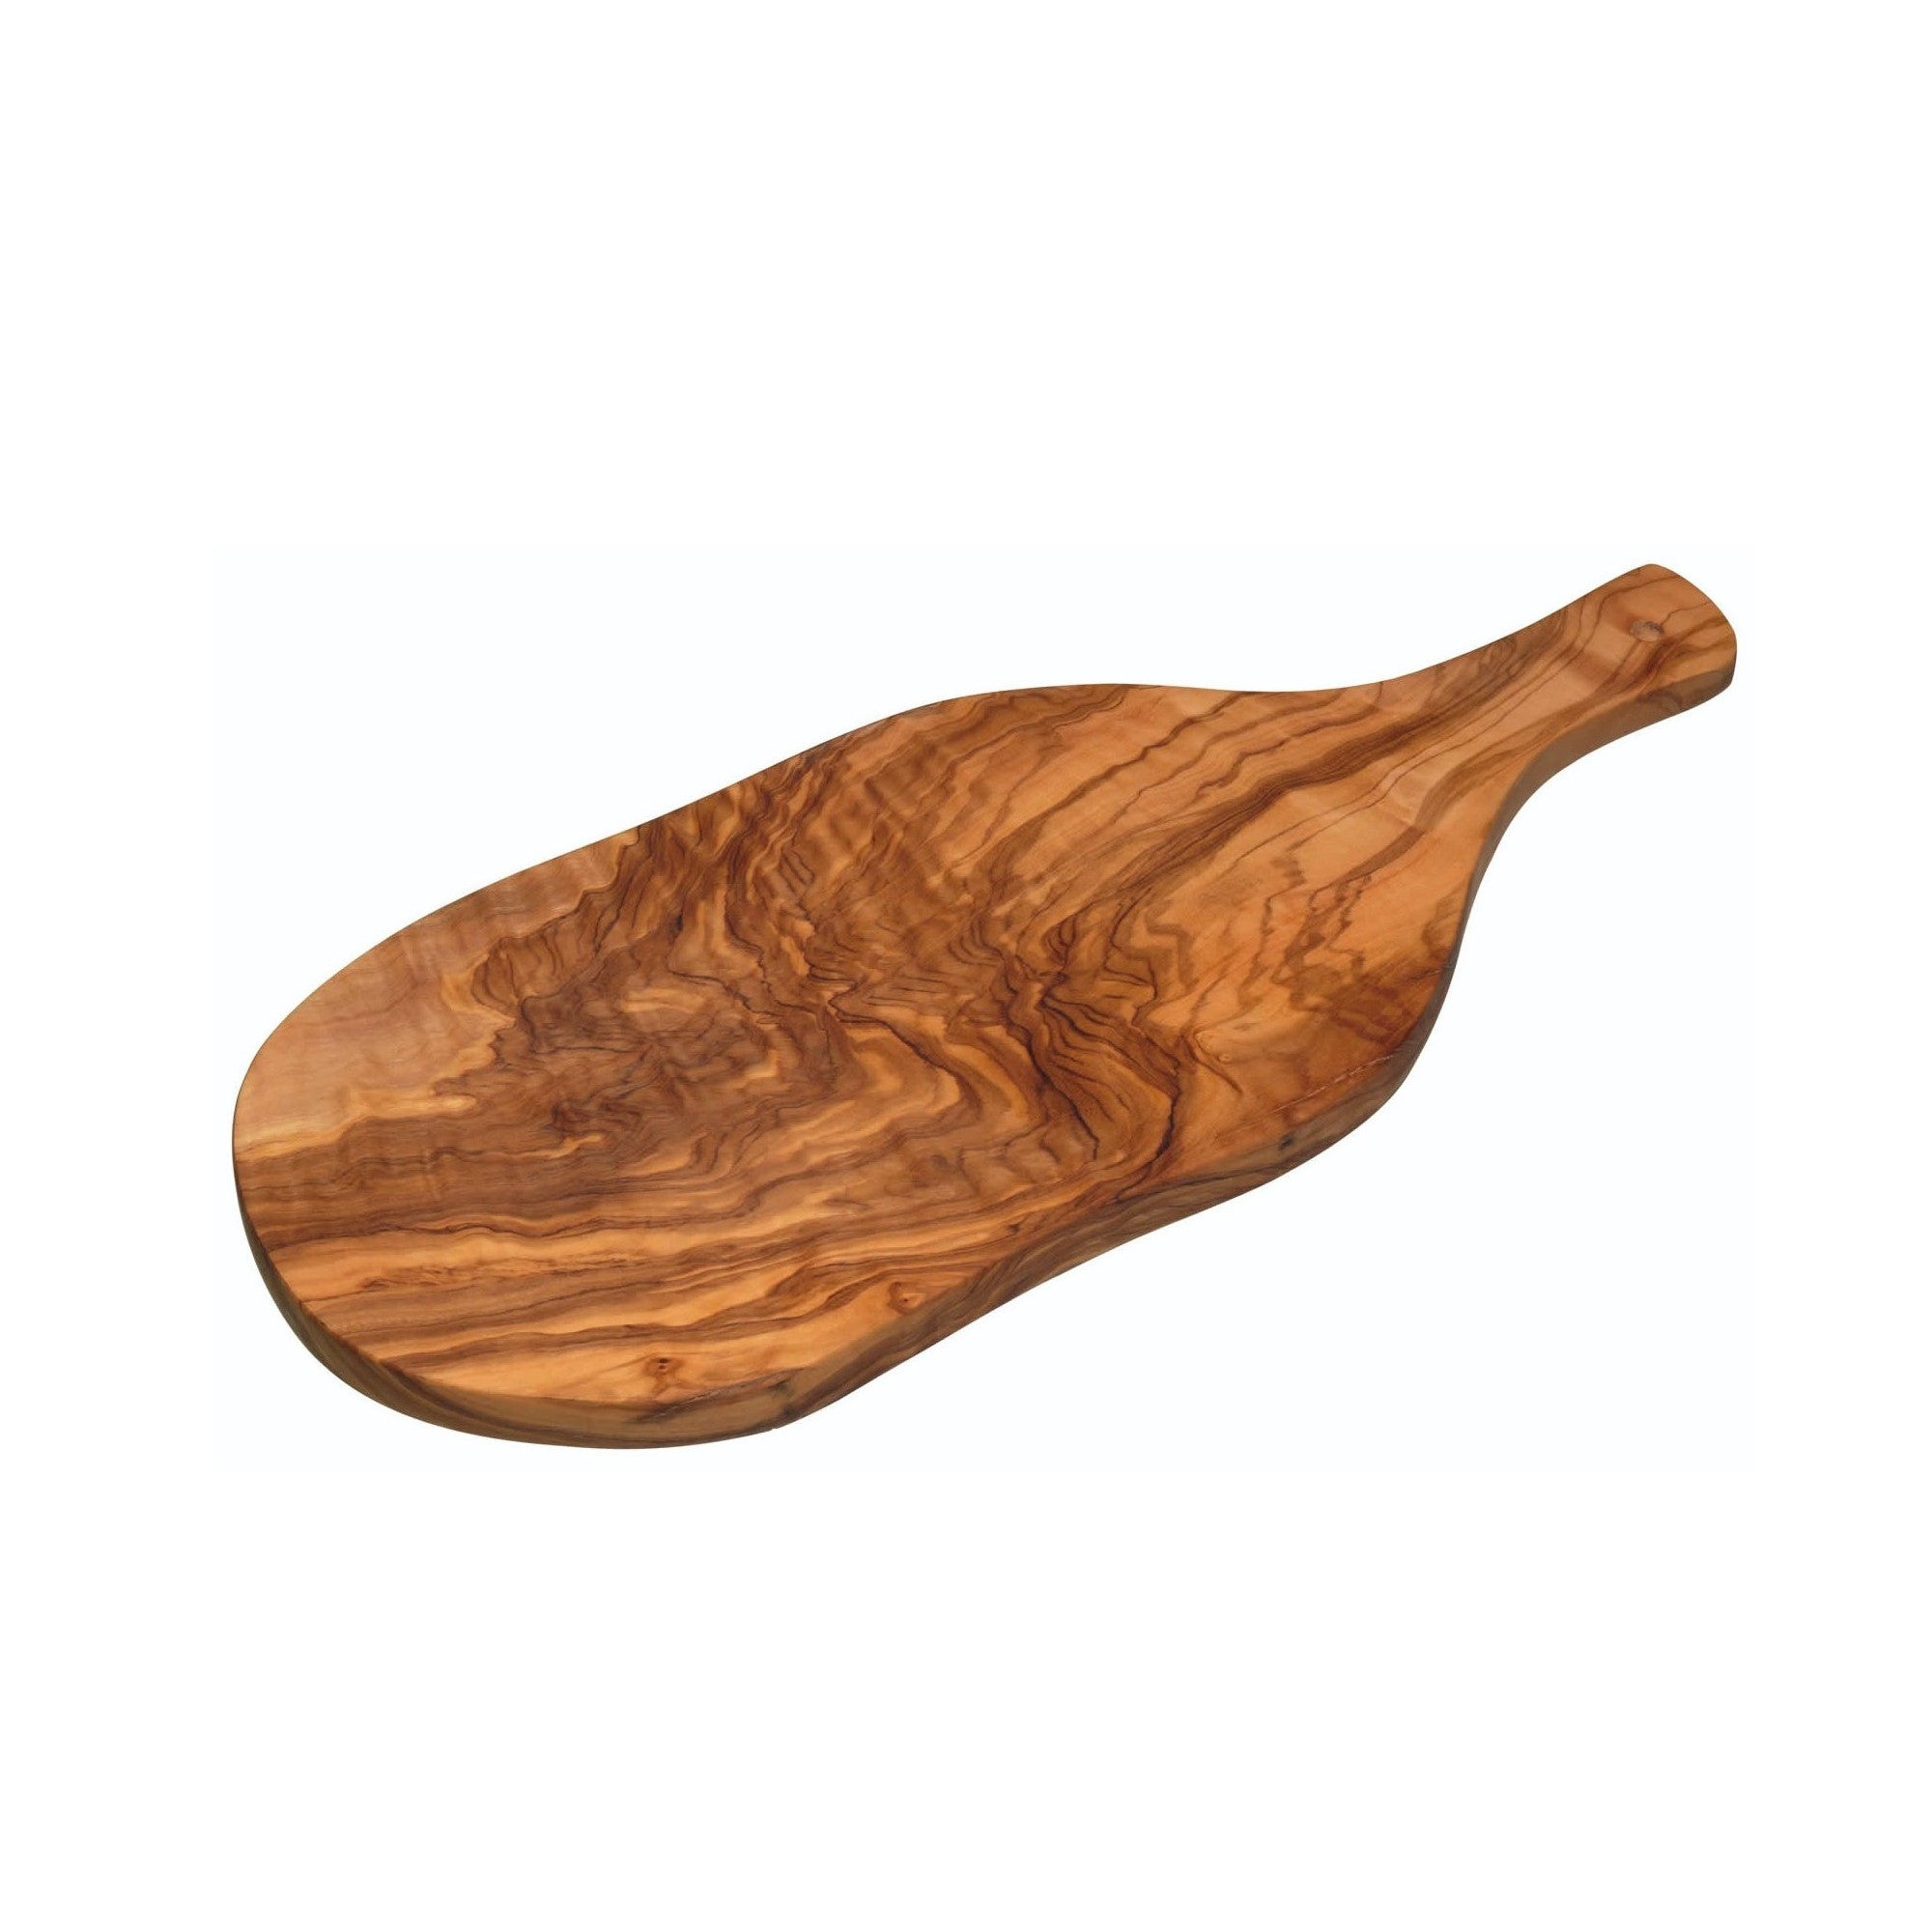 Image of KitchenCraft World of Flavours Italian Olive Wood Serving Board 30x17cm Brown